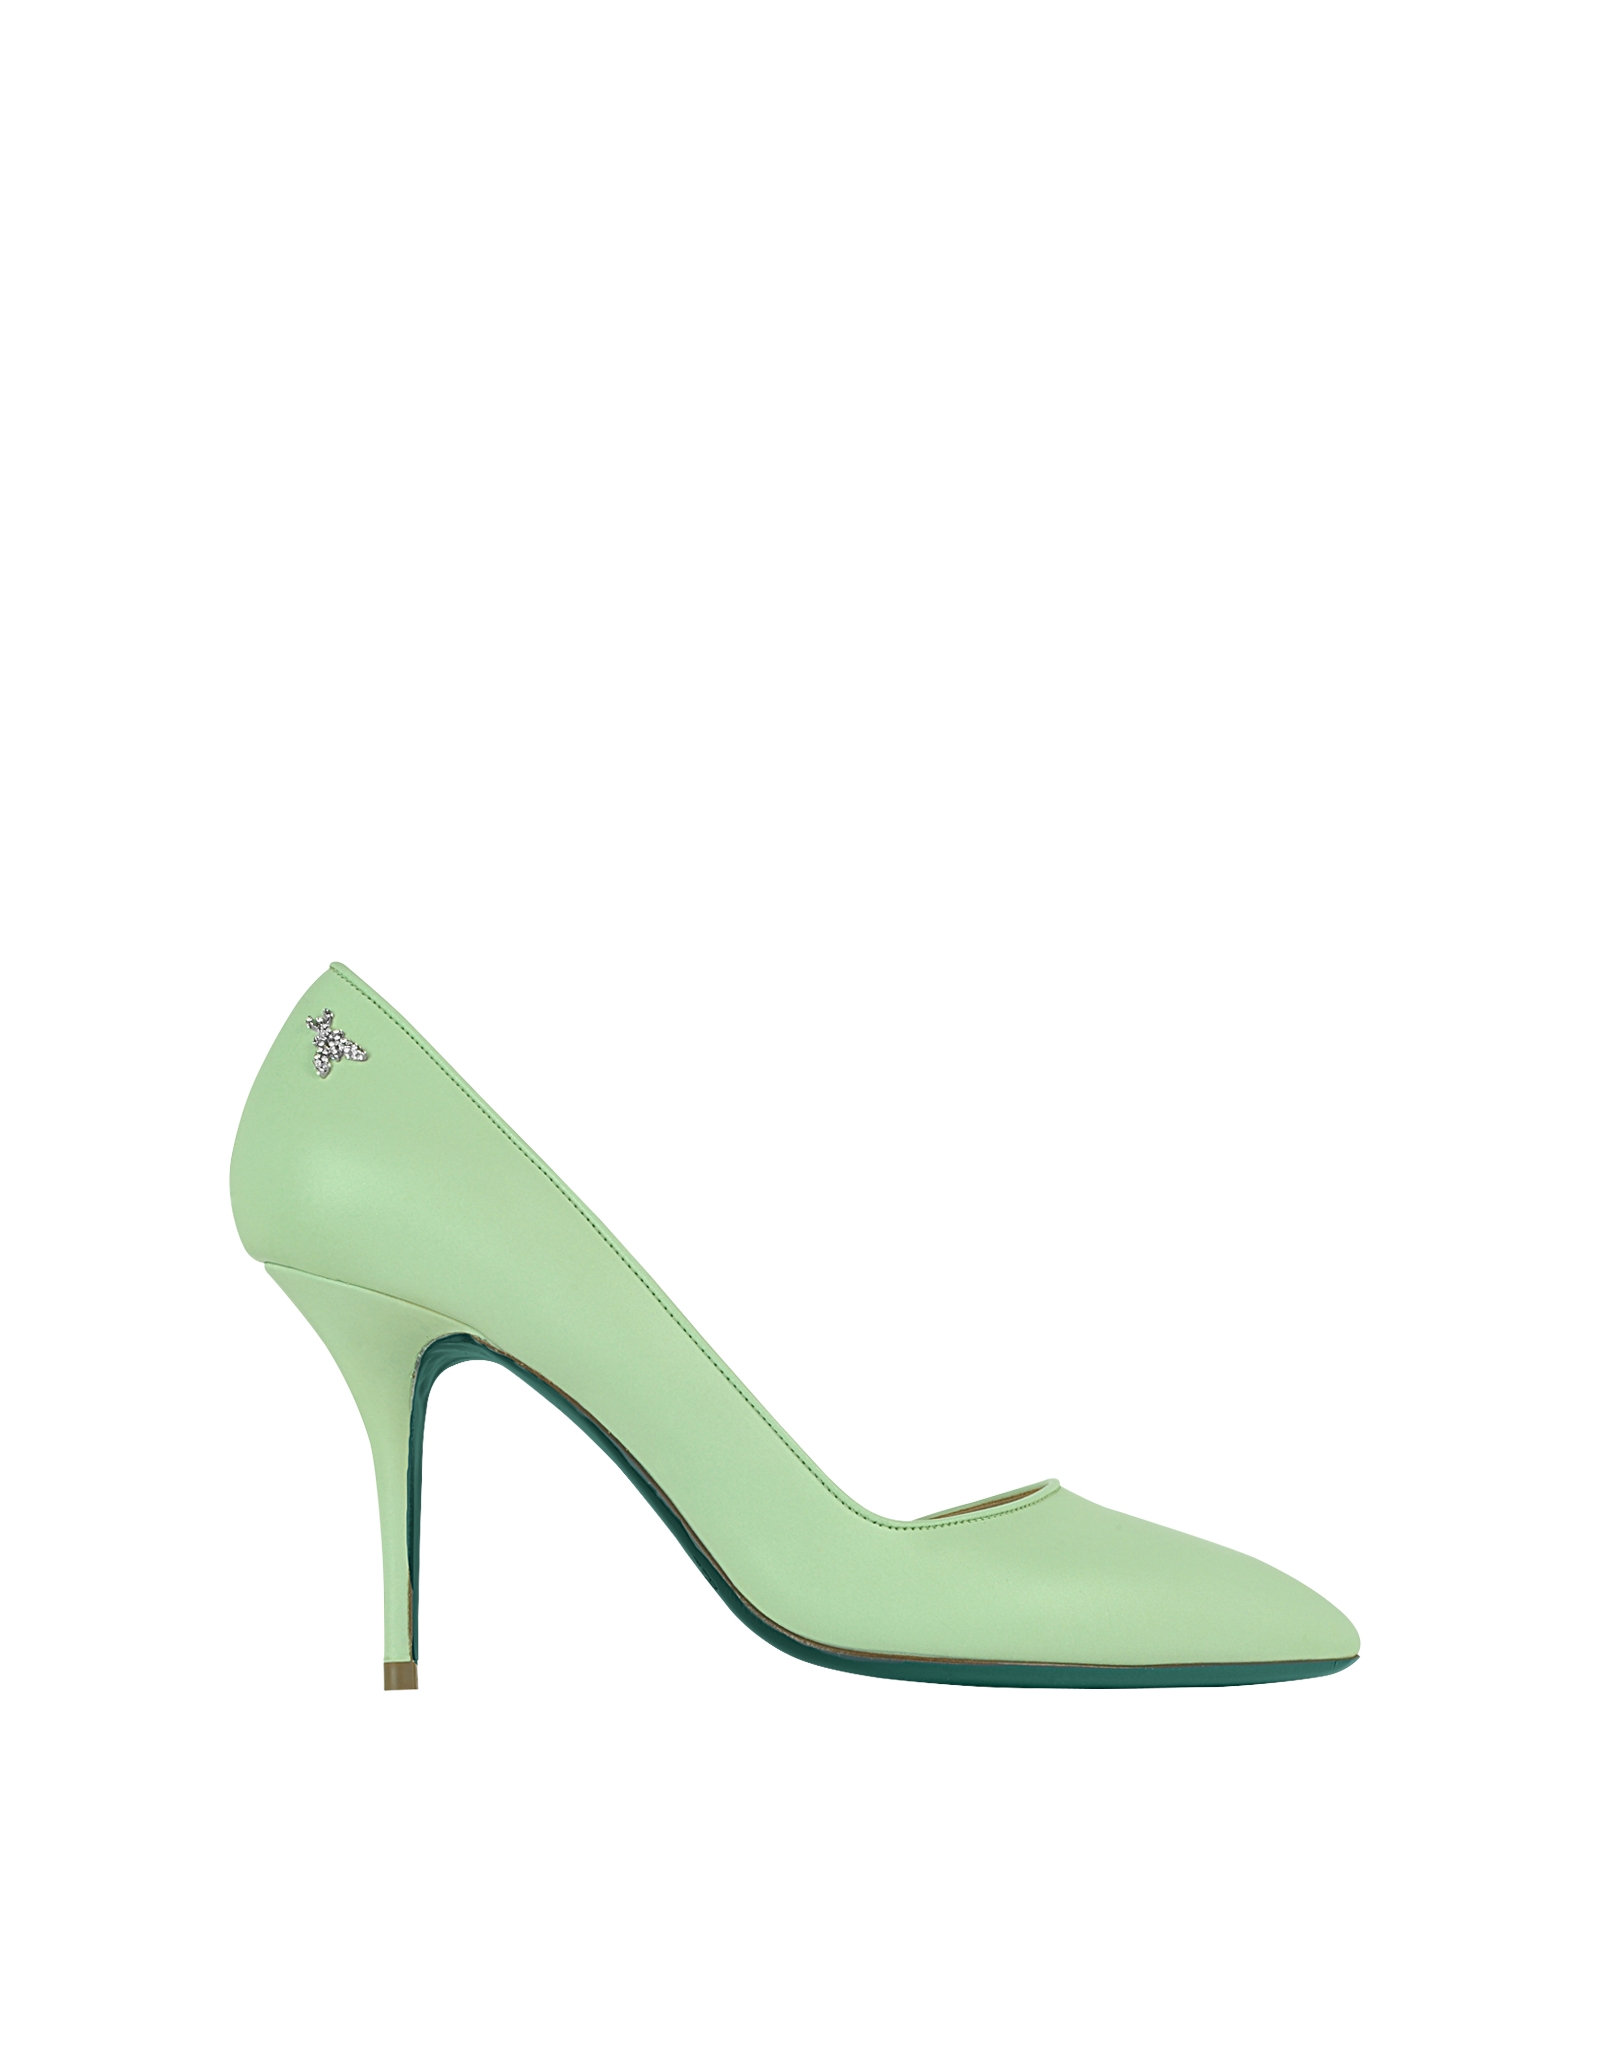 Lyst - Patrizia pepe Pale Green Leather Pump in Green